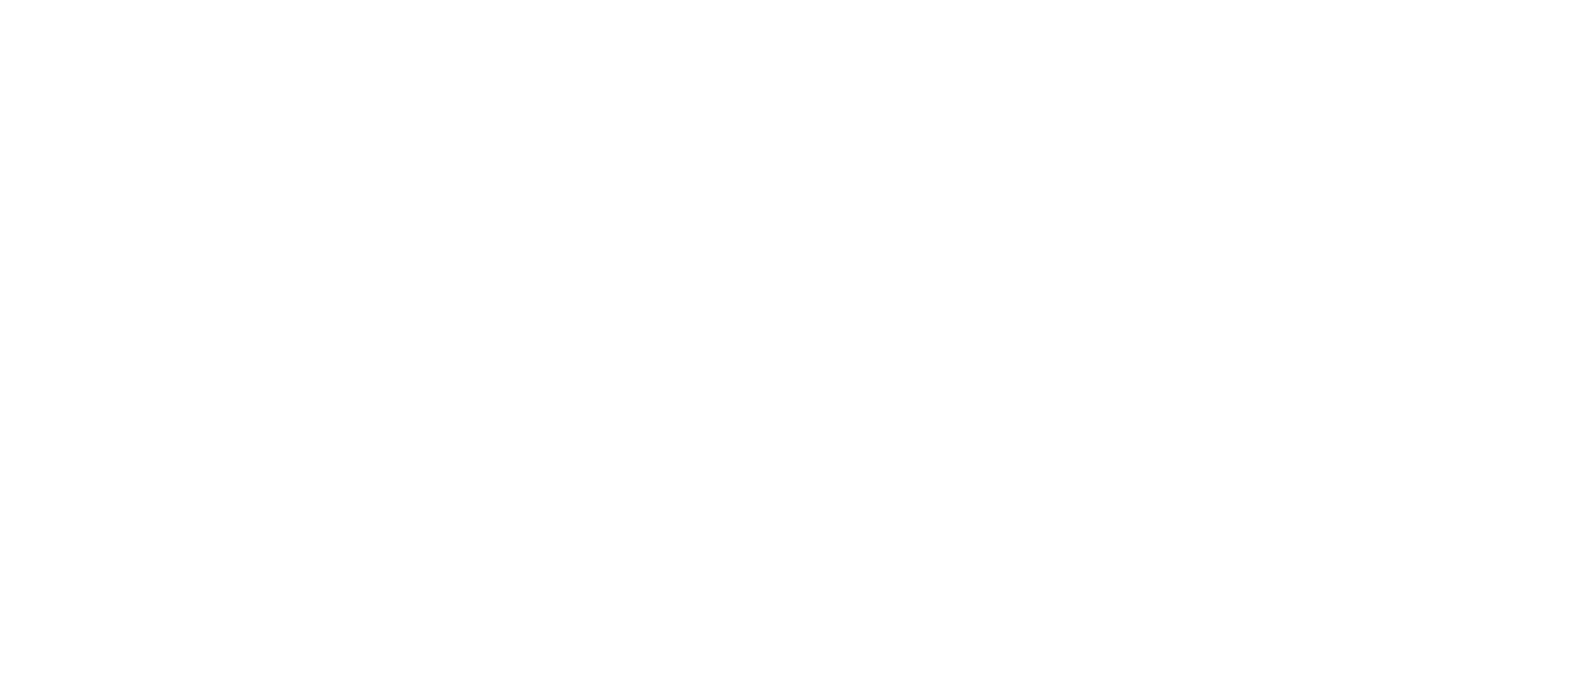 Grand Canyon Education logo for dark backgrounds (transparent PNG)